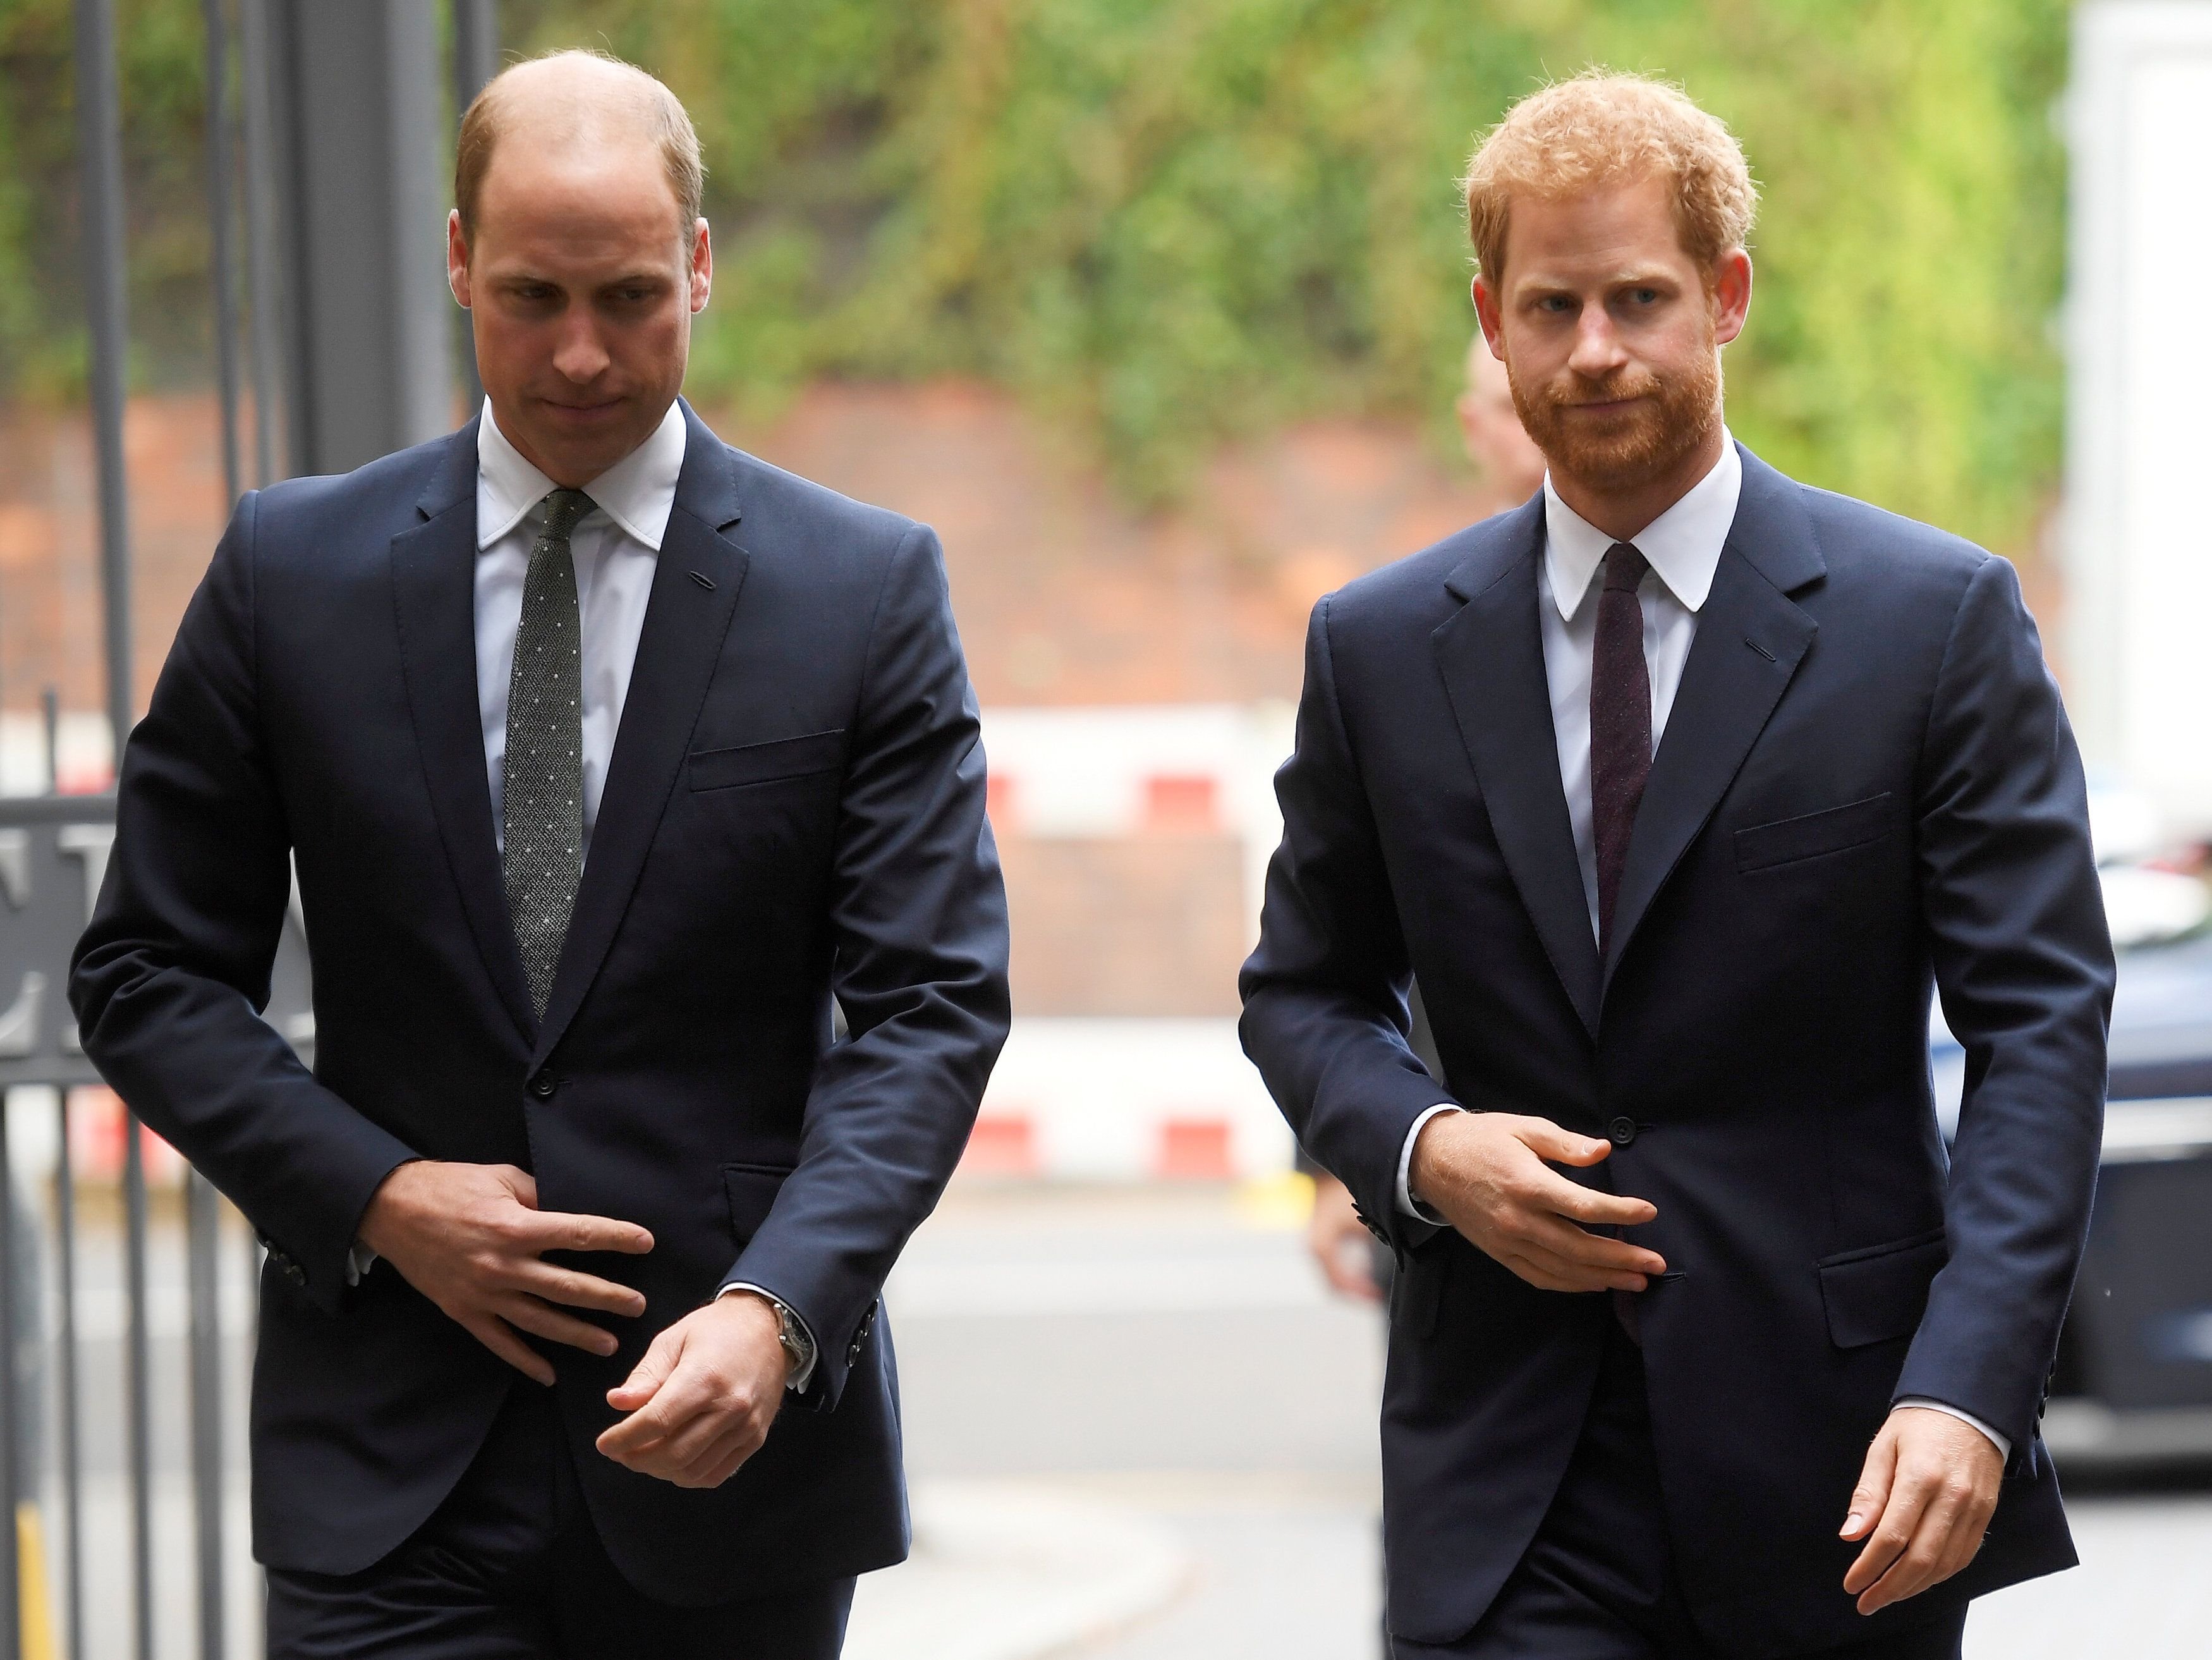 Prince William and Prince Harry during a visit to the newly established Royal Foundation Support4Grenfell community hub on September 5, 2017 in London, England. | Source: Getty Images